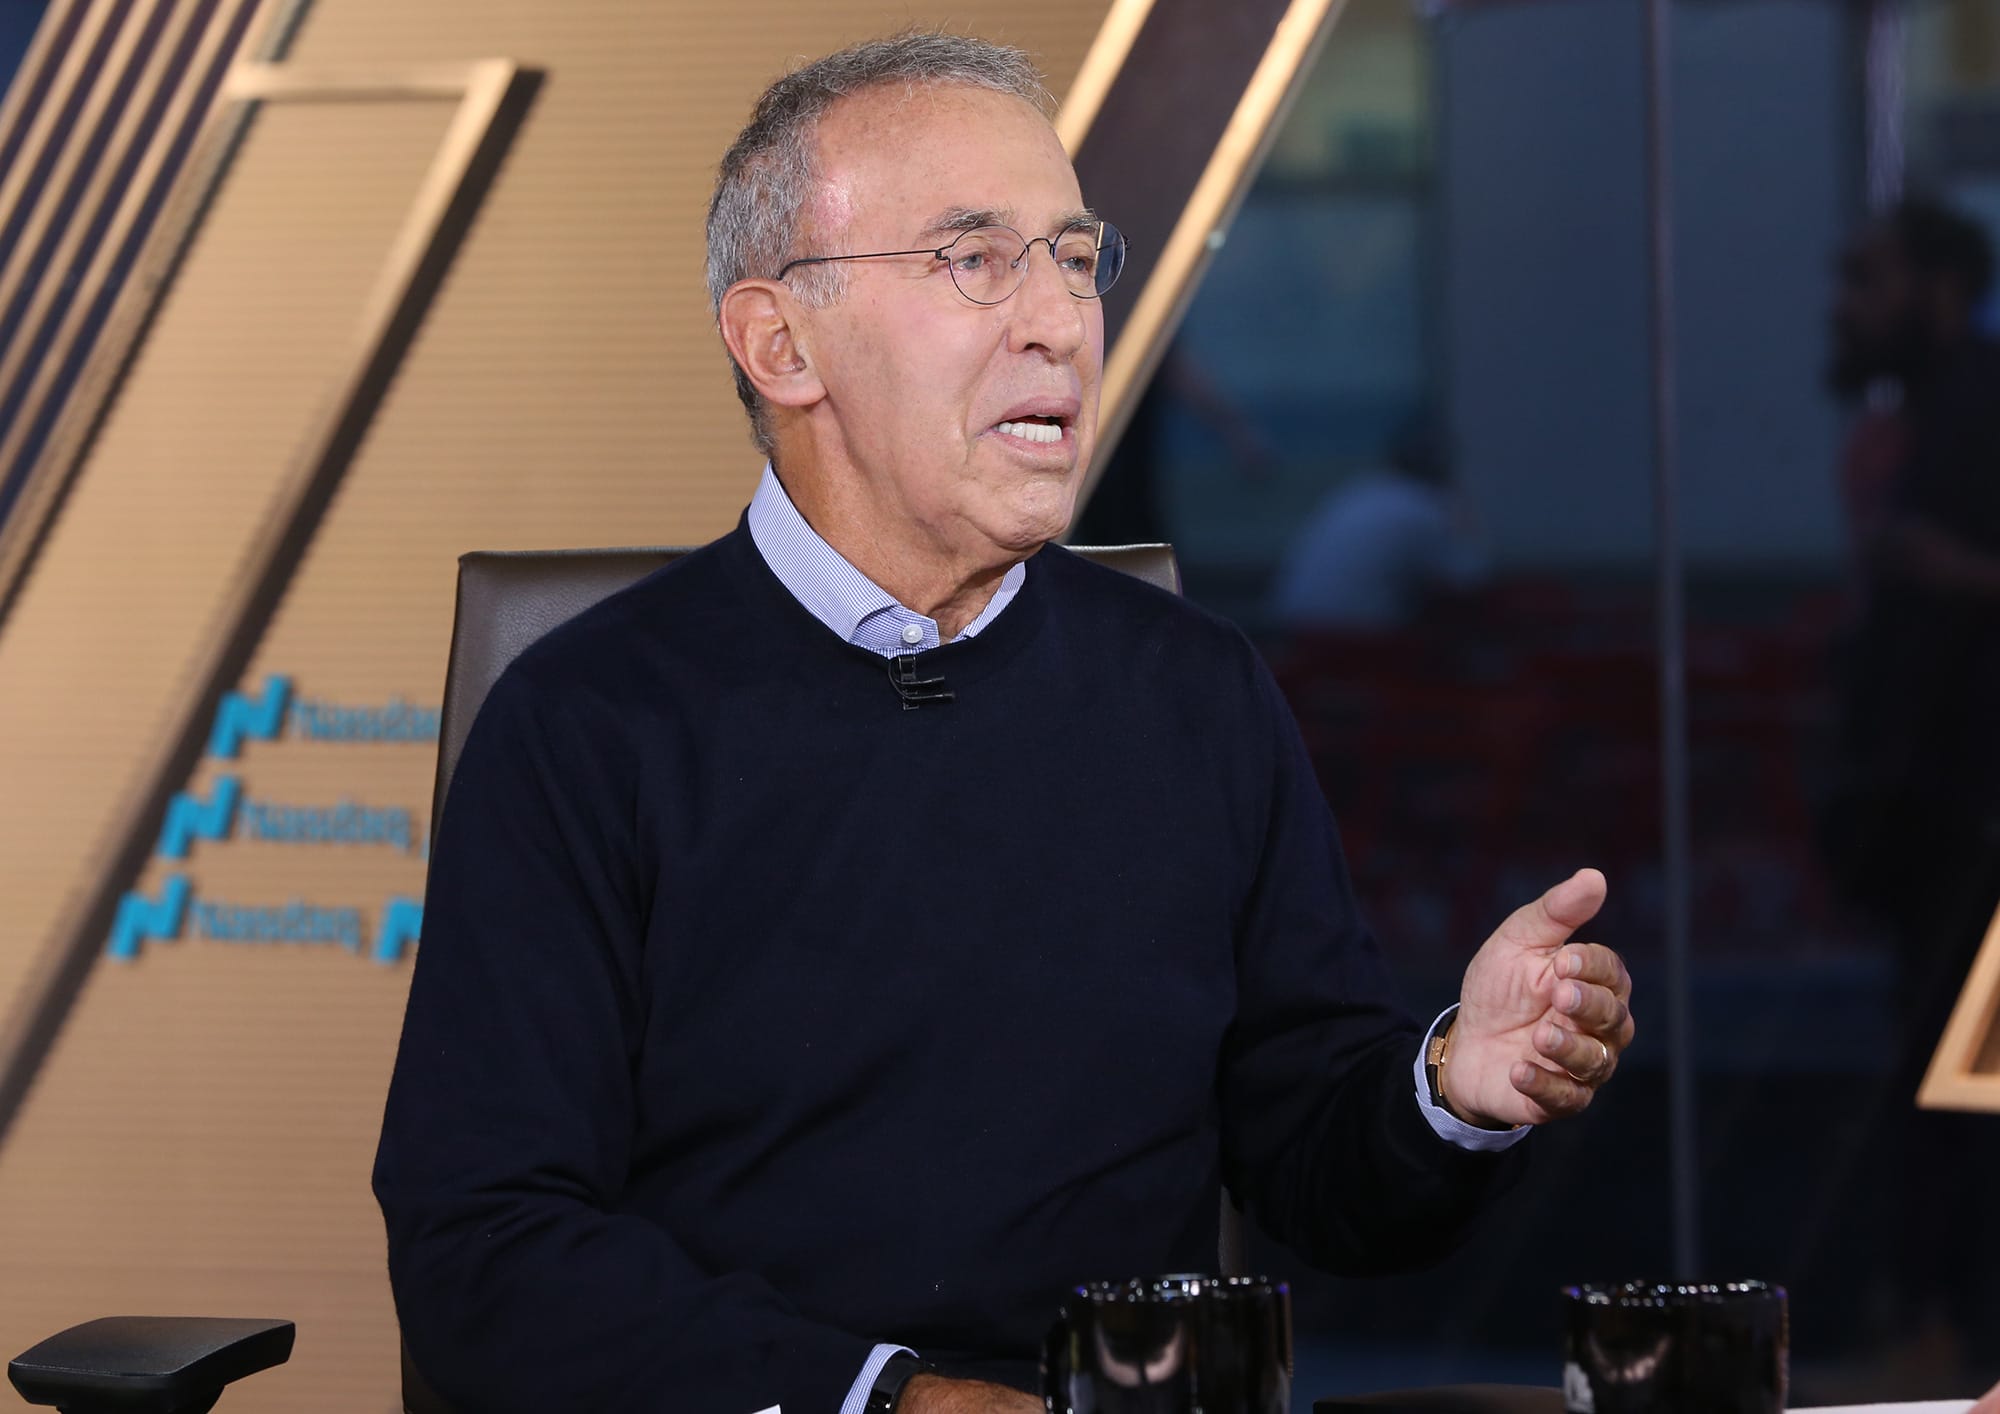 Ron Baron says he made $6 billion on Tesla investment, plans to be a shareholder for a long time